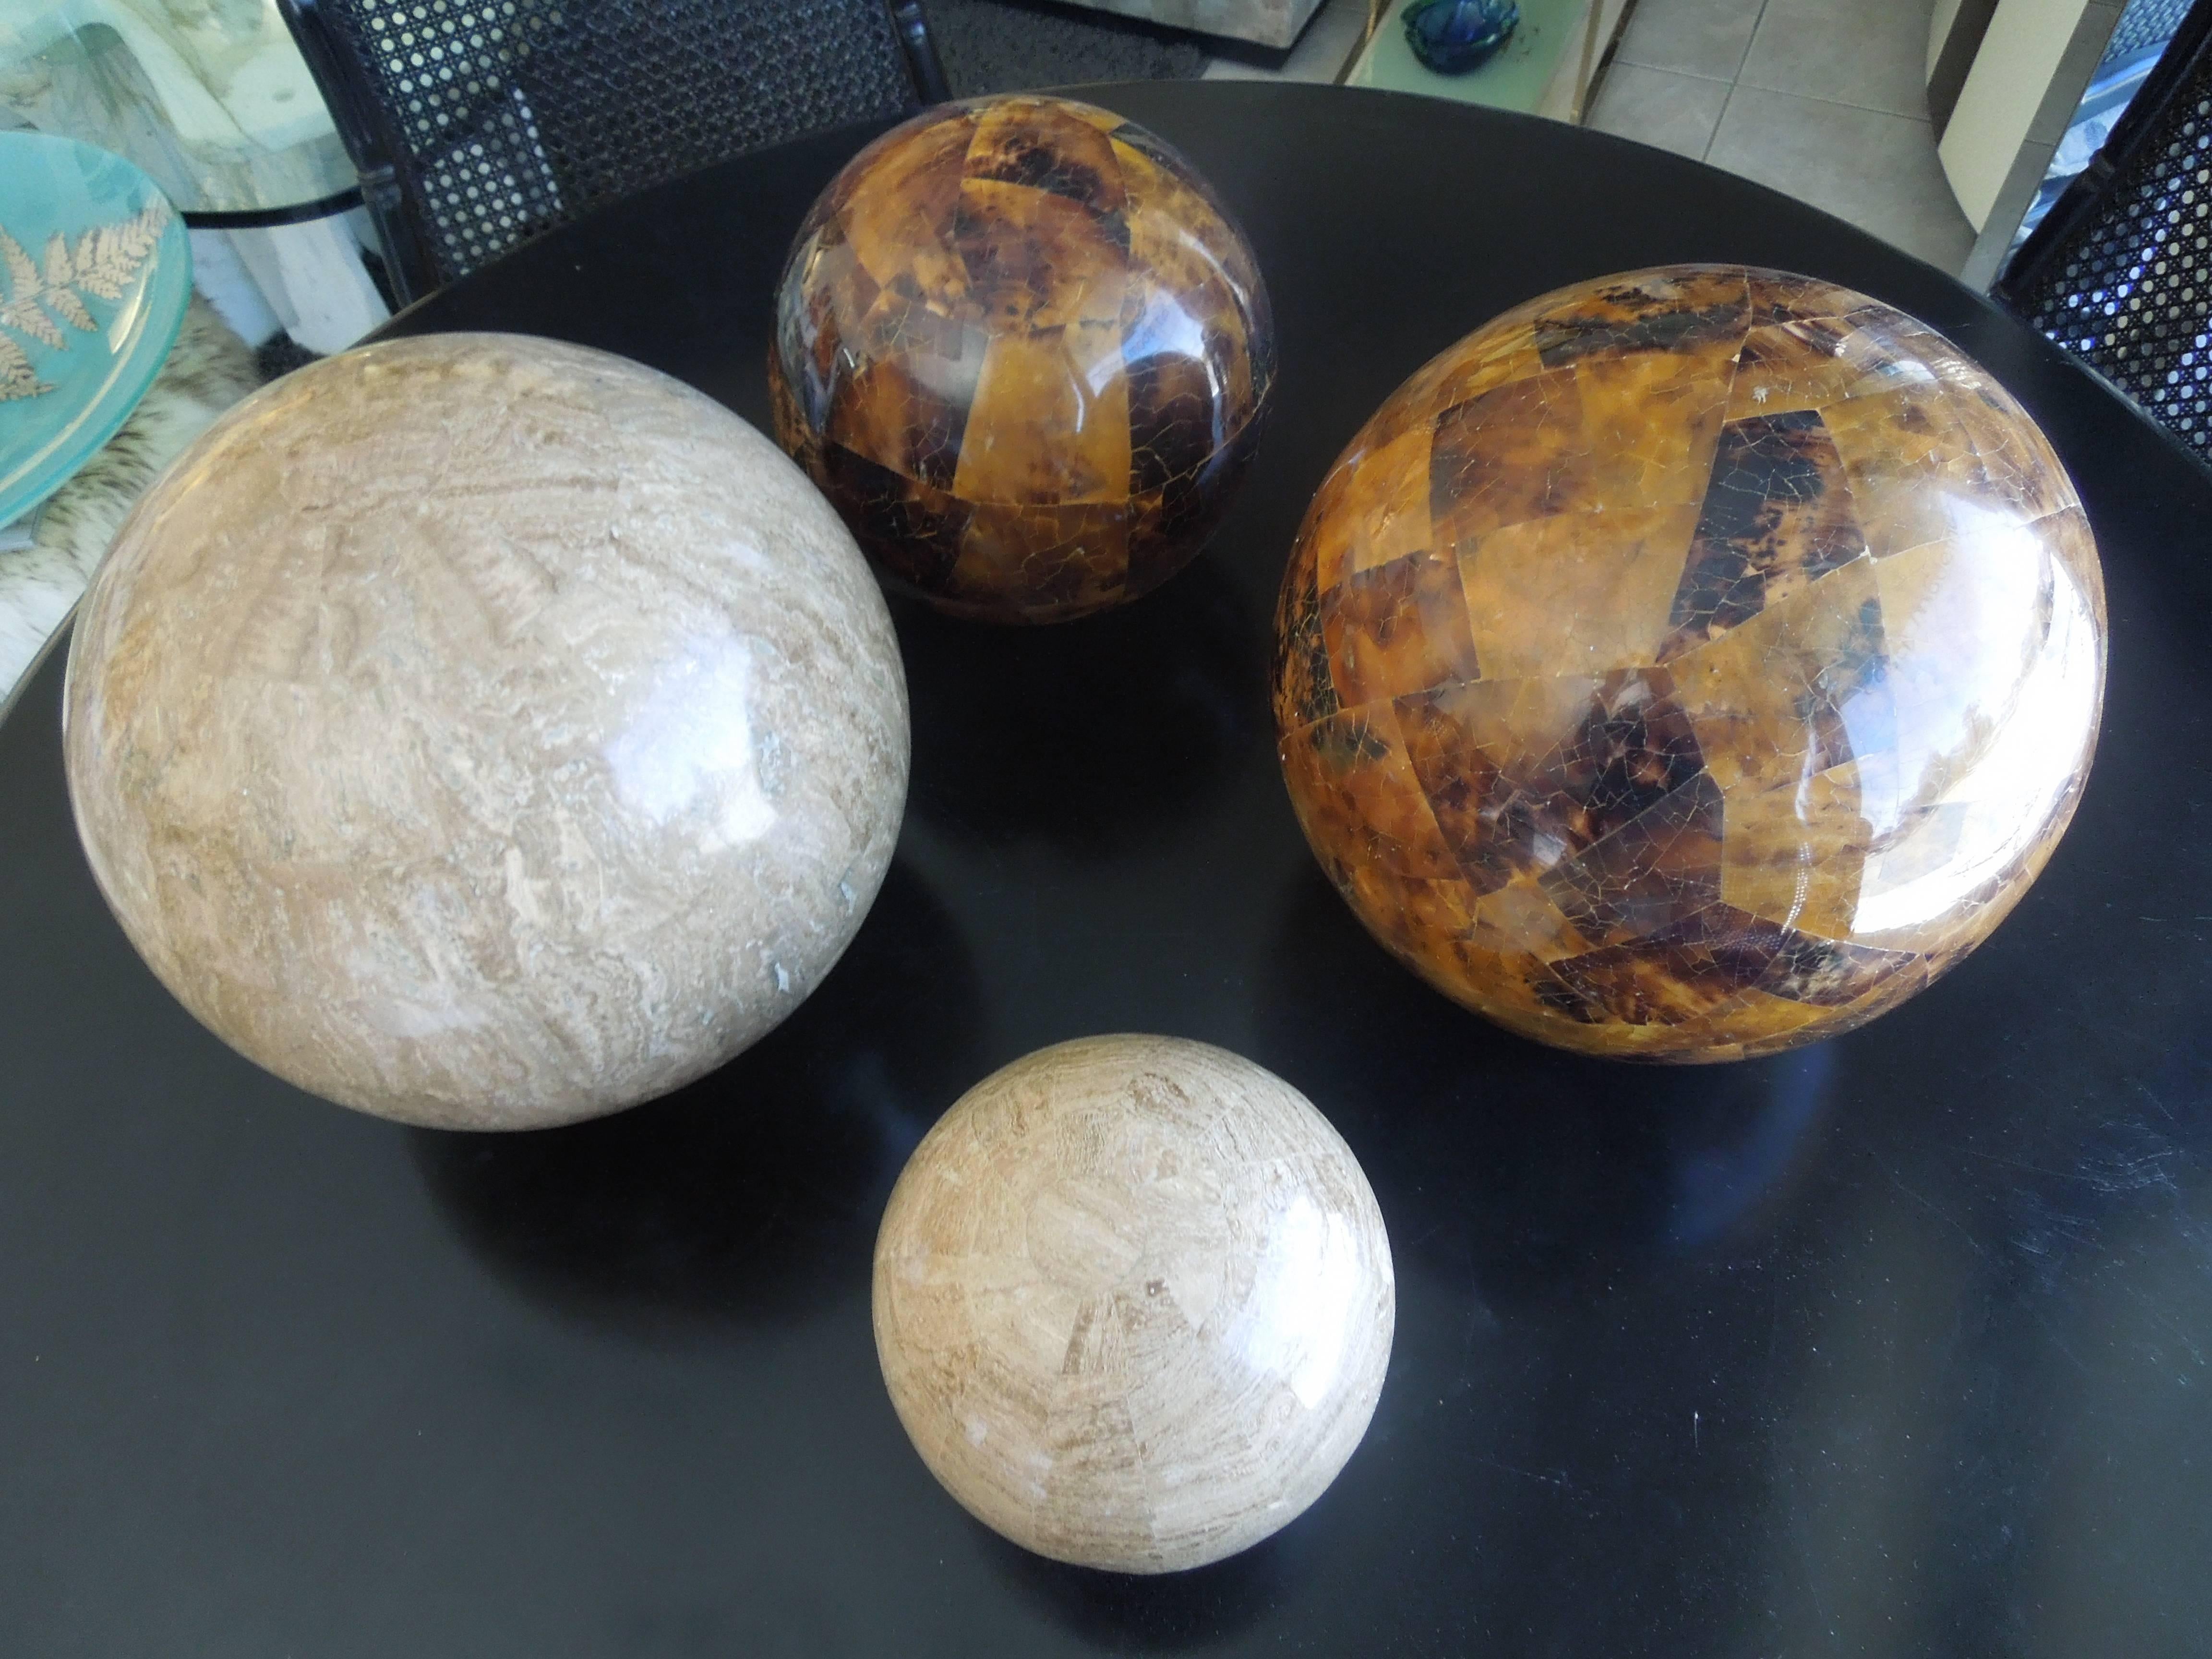 From a very upscale estate in Palm Springs, CA are a set of rare tessellated stone spheres. Two are in travertine stone and two rare dark brown color stone. They were made by hand in the Philippines for Maitland smith. They appear perfectly round on